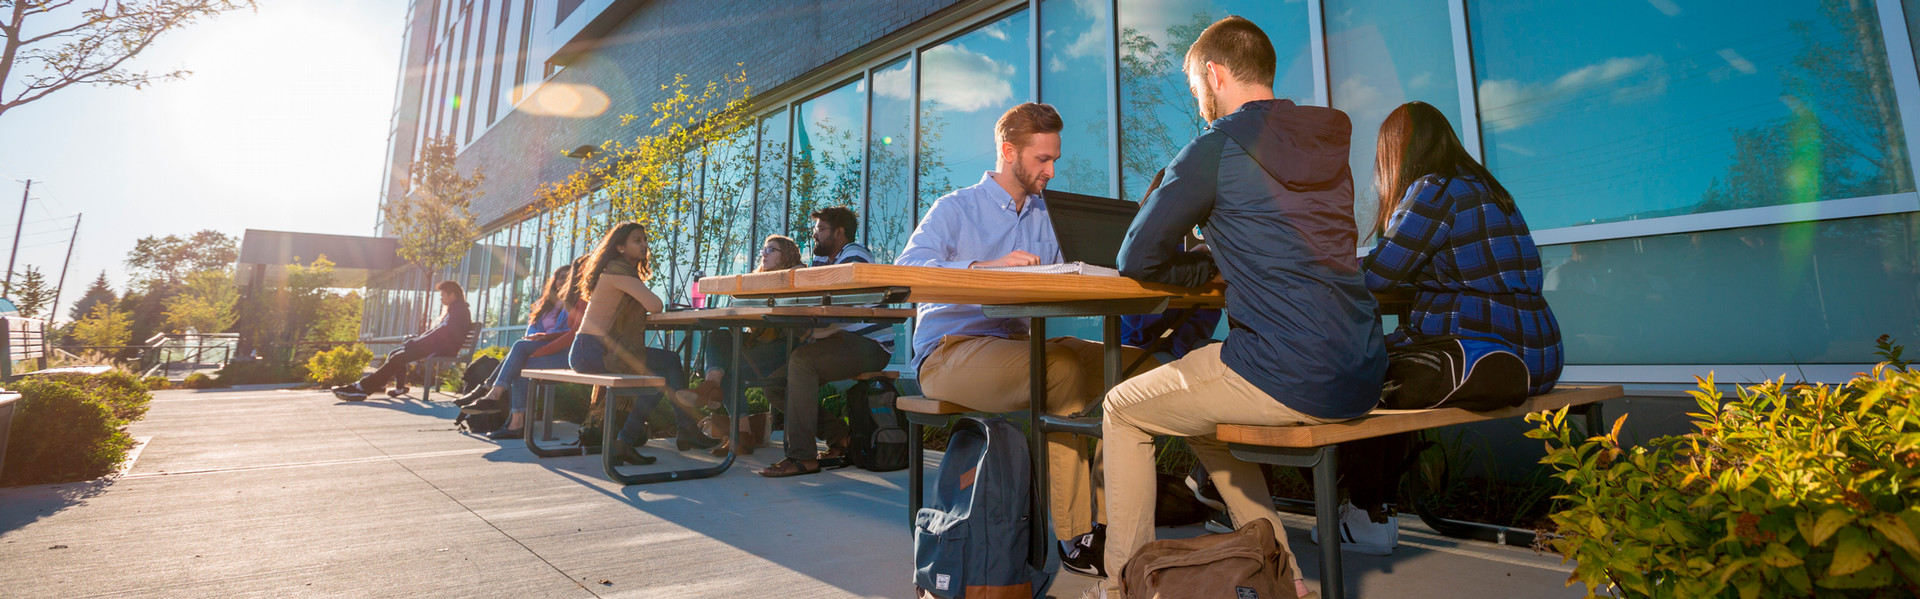 Students studying in groups at tables outside of a campus building.